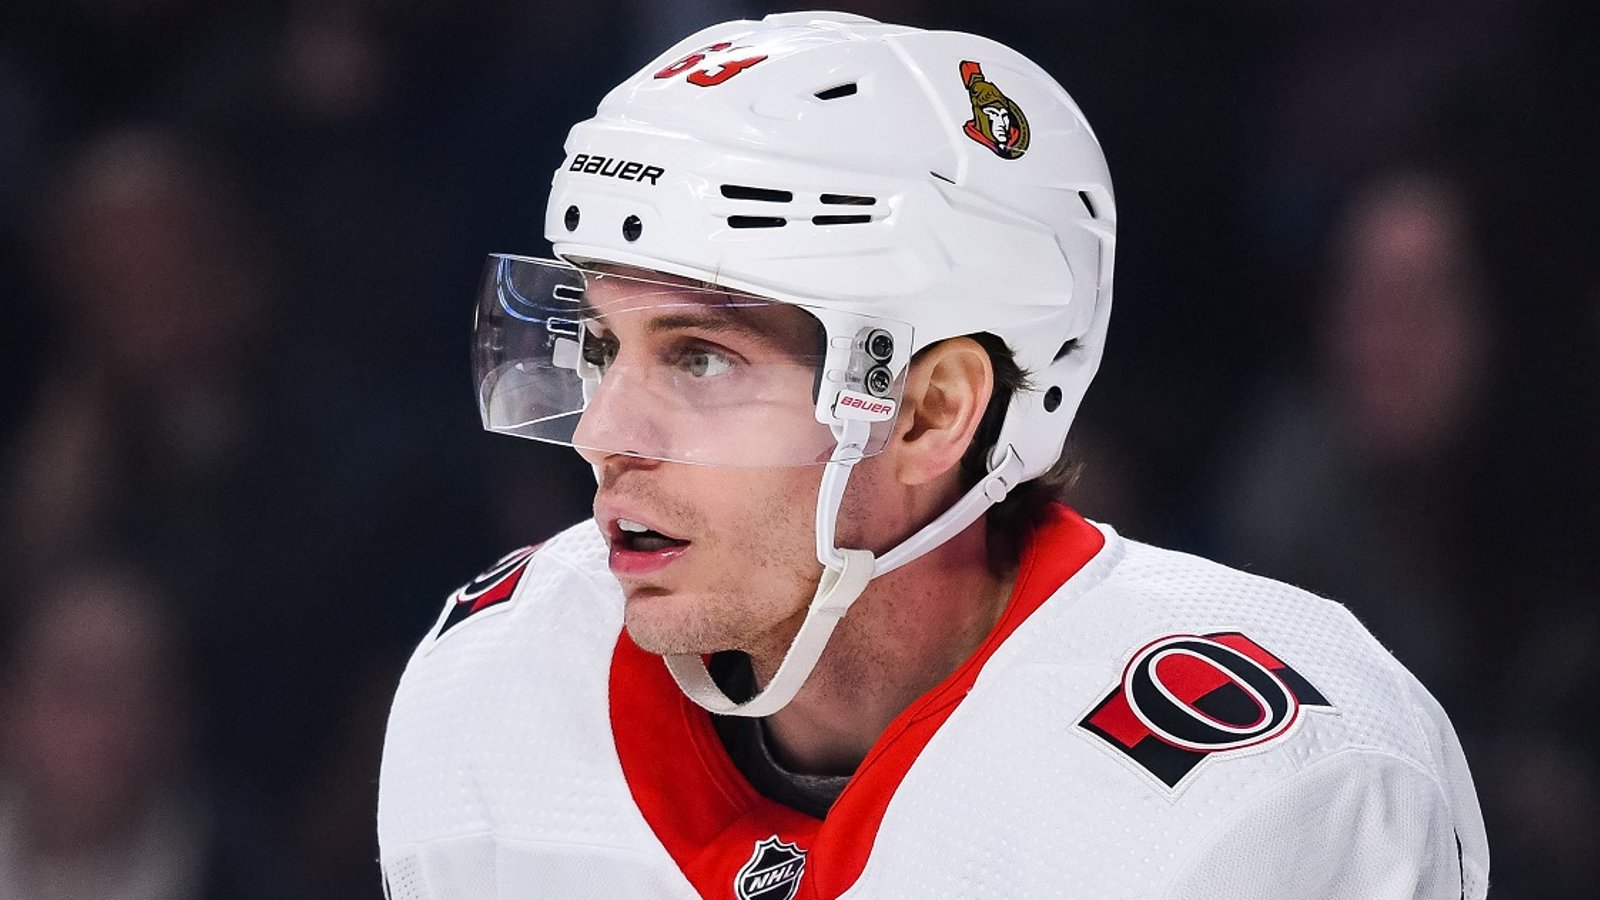 Senators pull 2 players out of the lineup ahead of tonight's game.